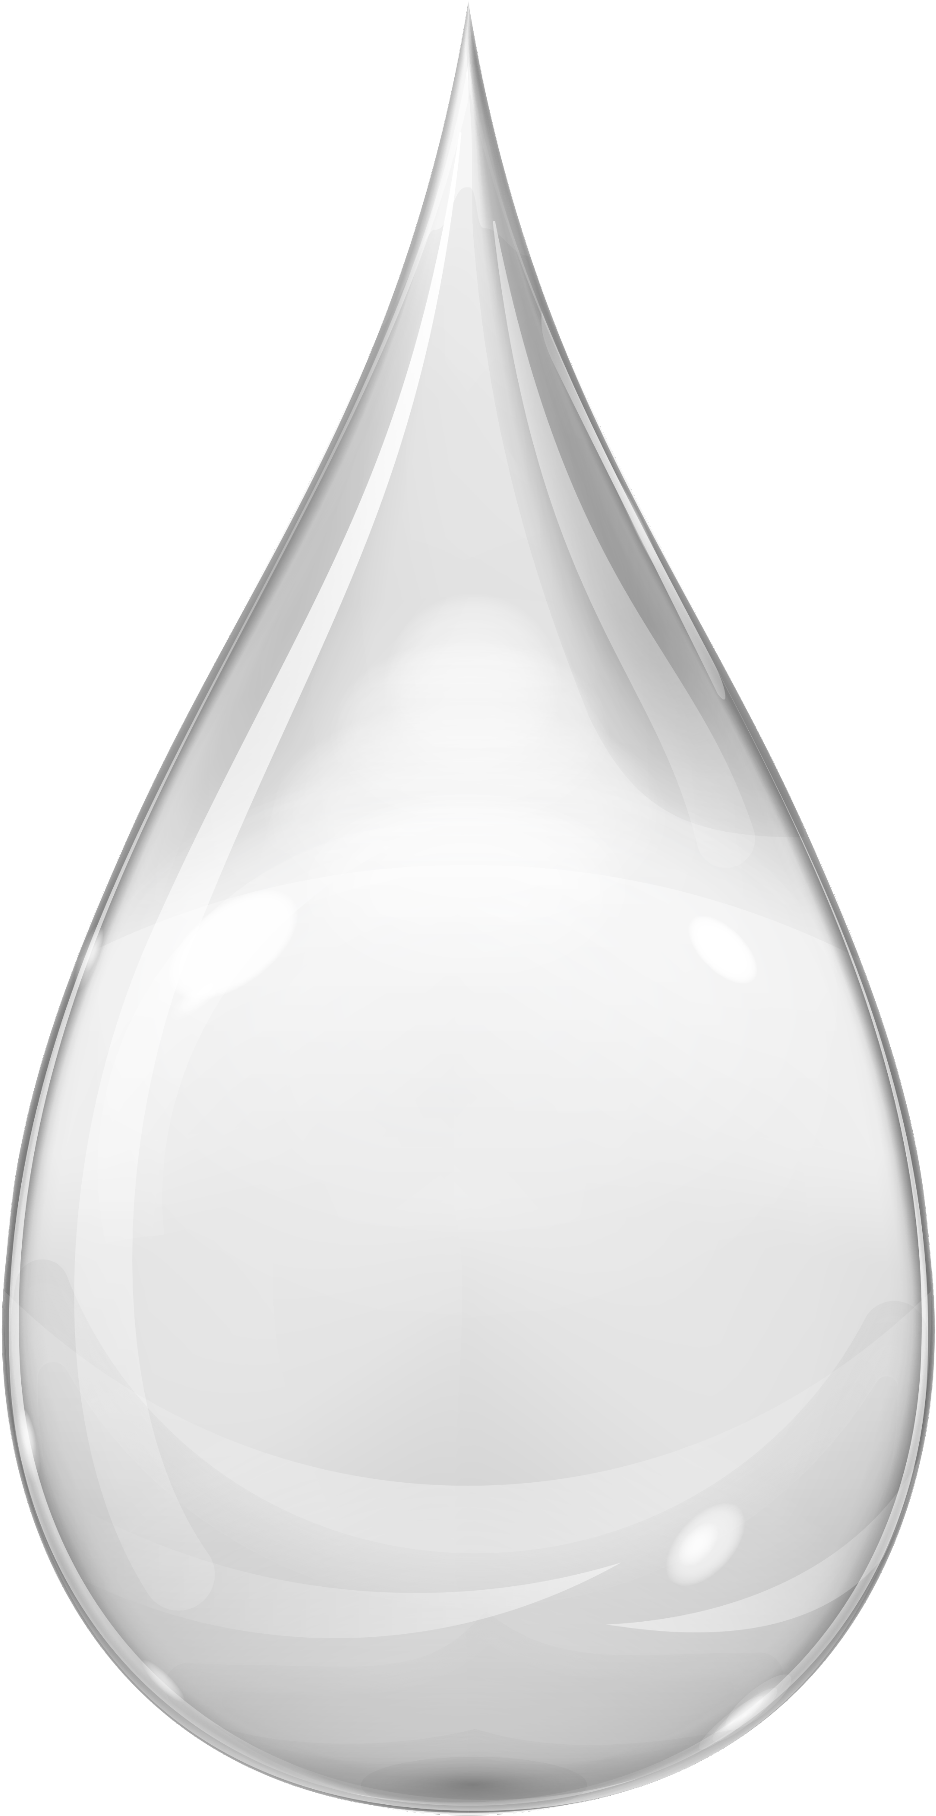 Glossy Teardrop Graphic PNG image